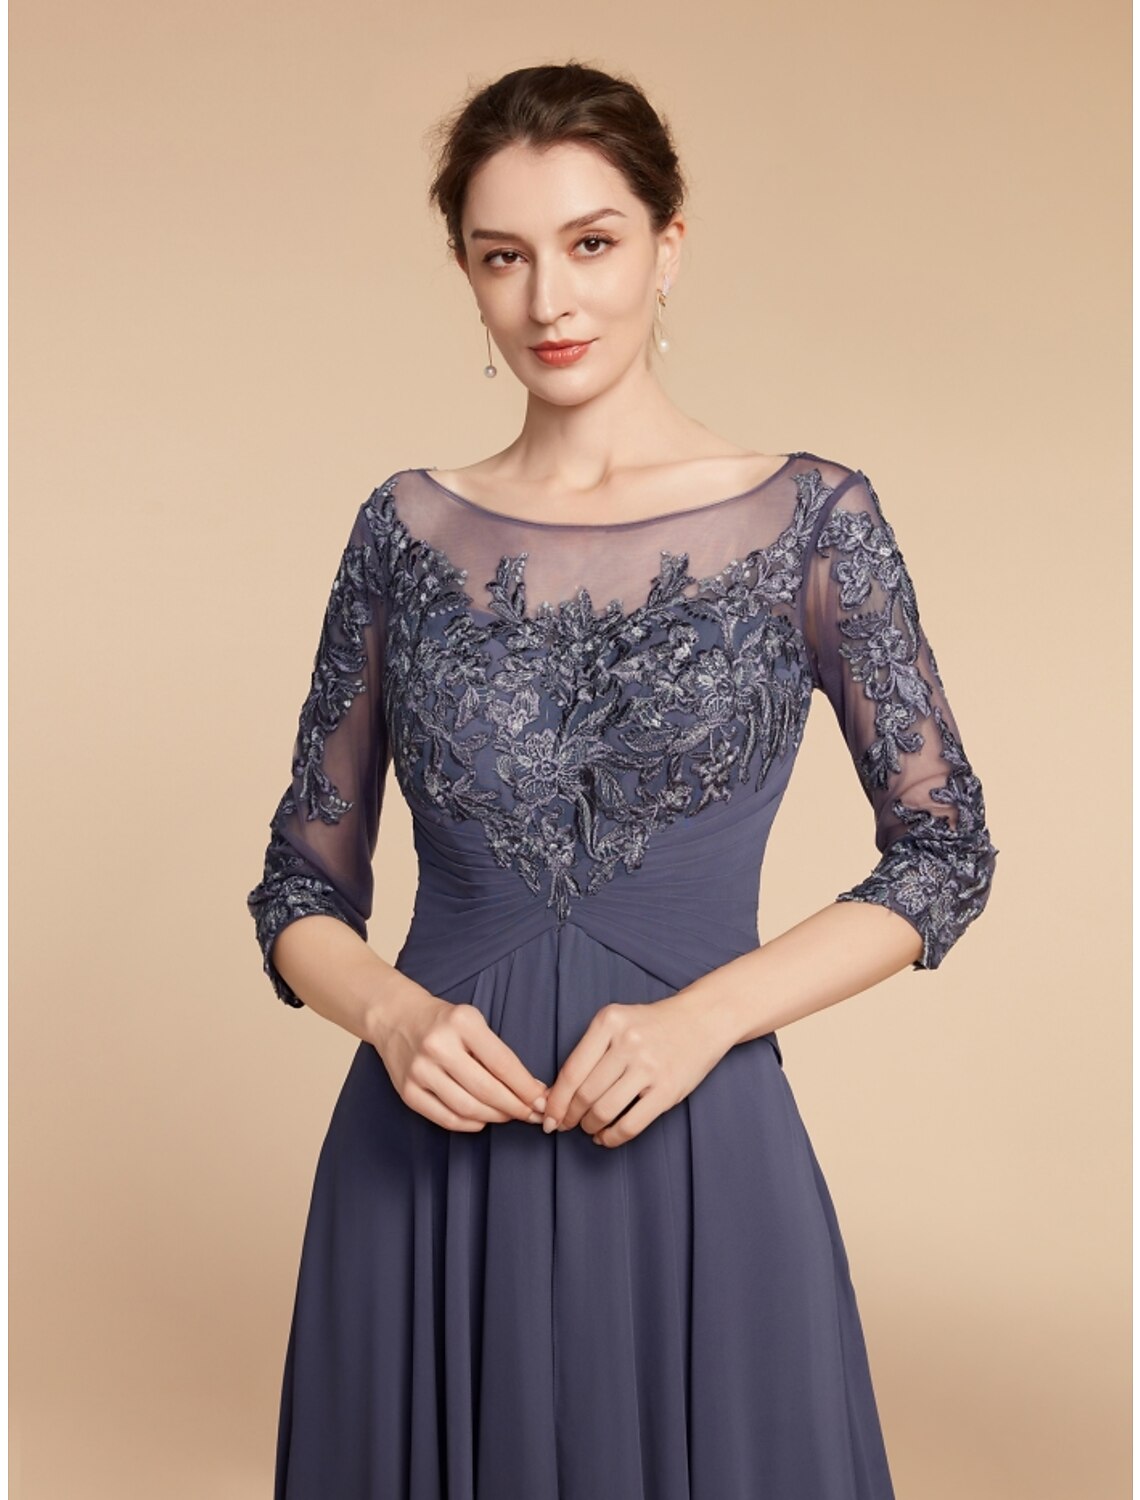 Sheath / Column Mother of the Bride Dress Wedding Guest Elegant Vintage Scoop Neck Ankle Length Chiffon Lace Half Sleeve with Ruffles Ruching